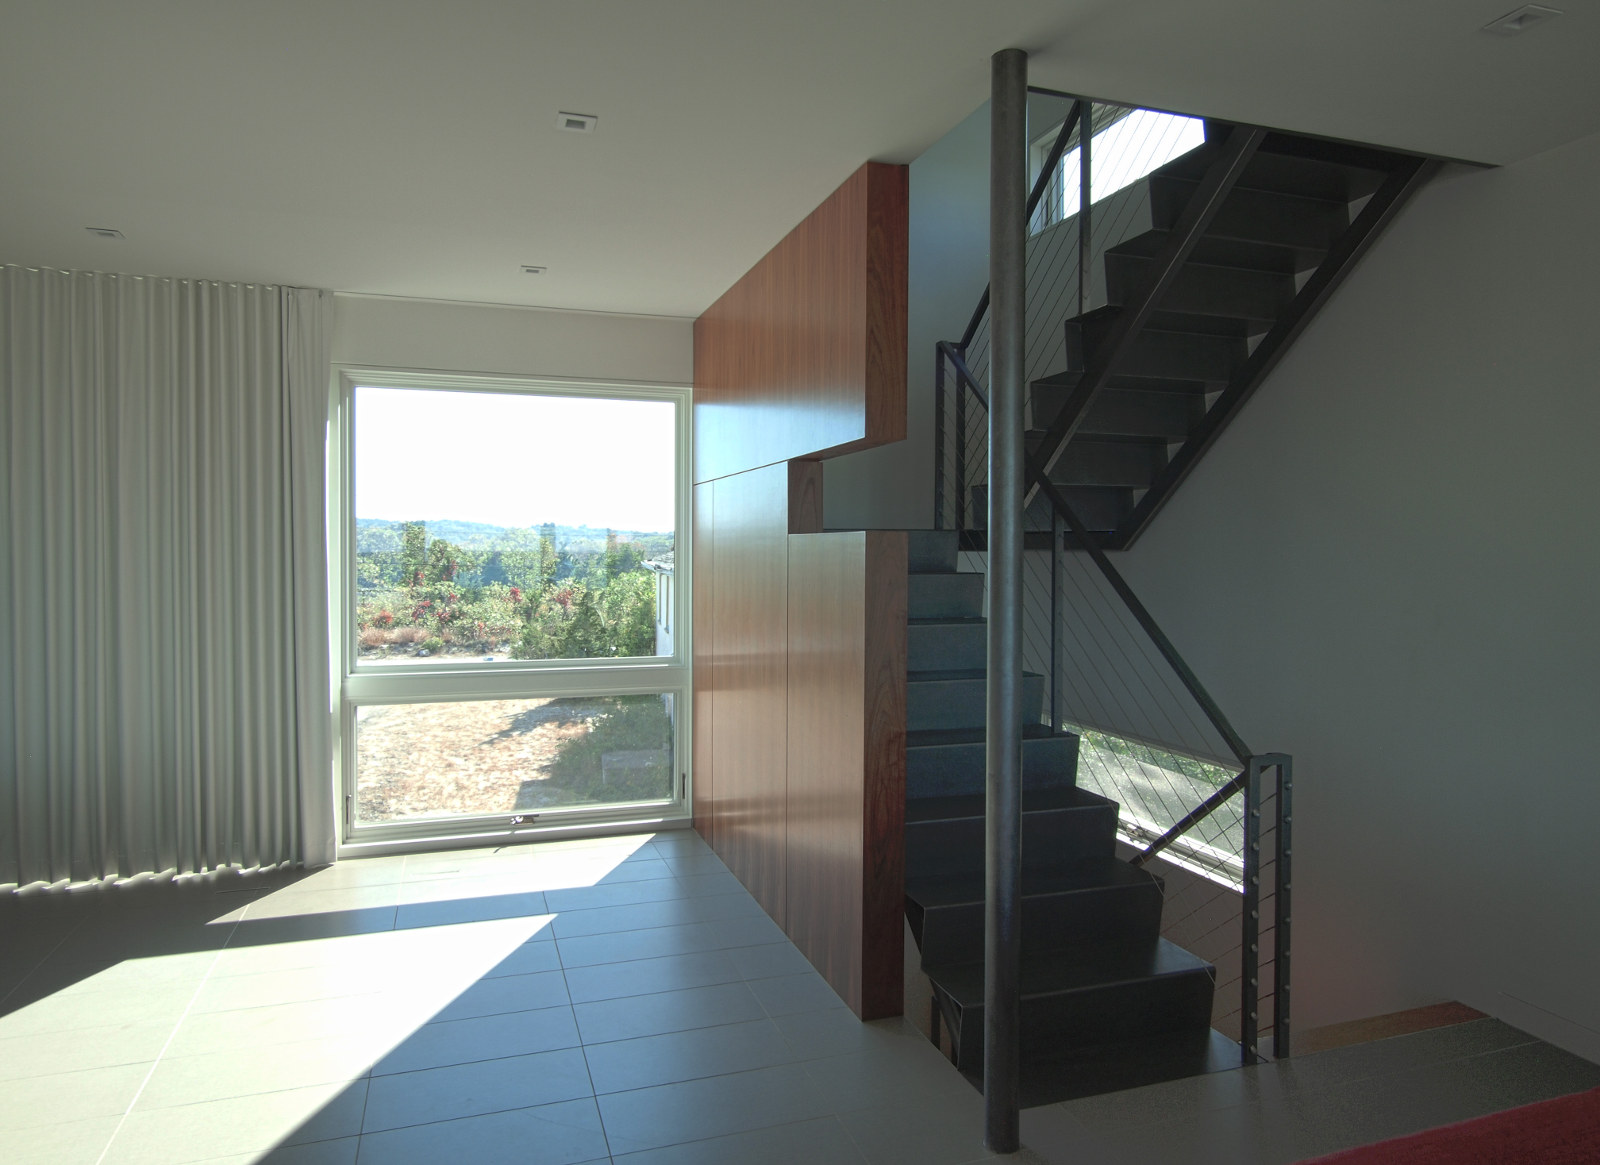 Steel stairs and stainless-steel cable railing; walnut veneer paneling at wall; large windows.